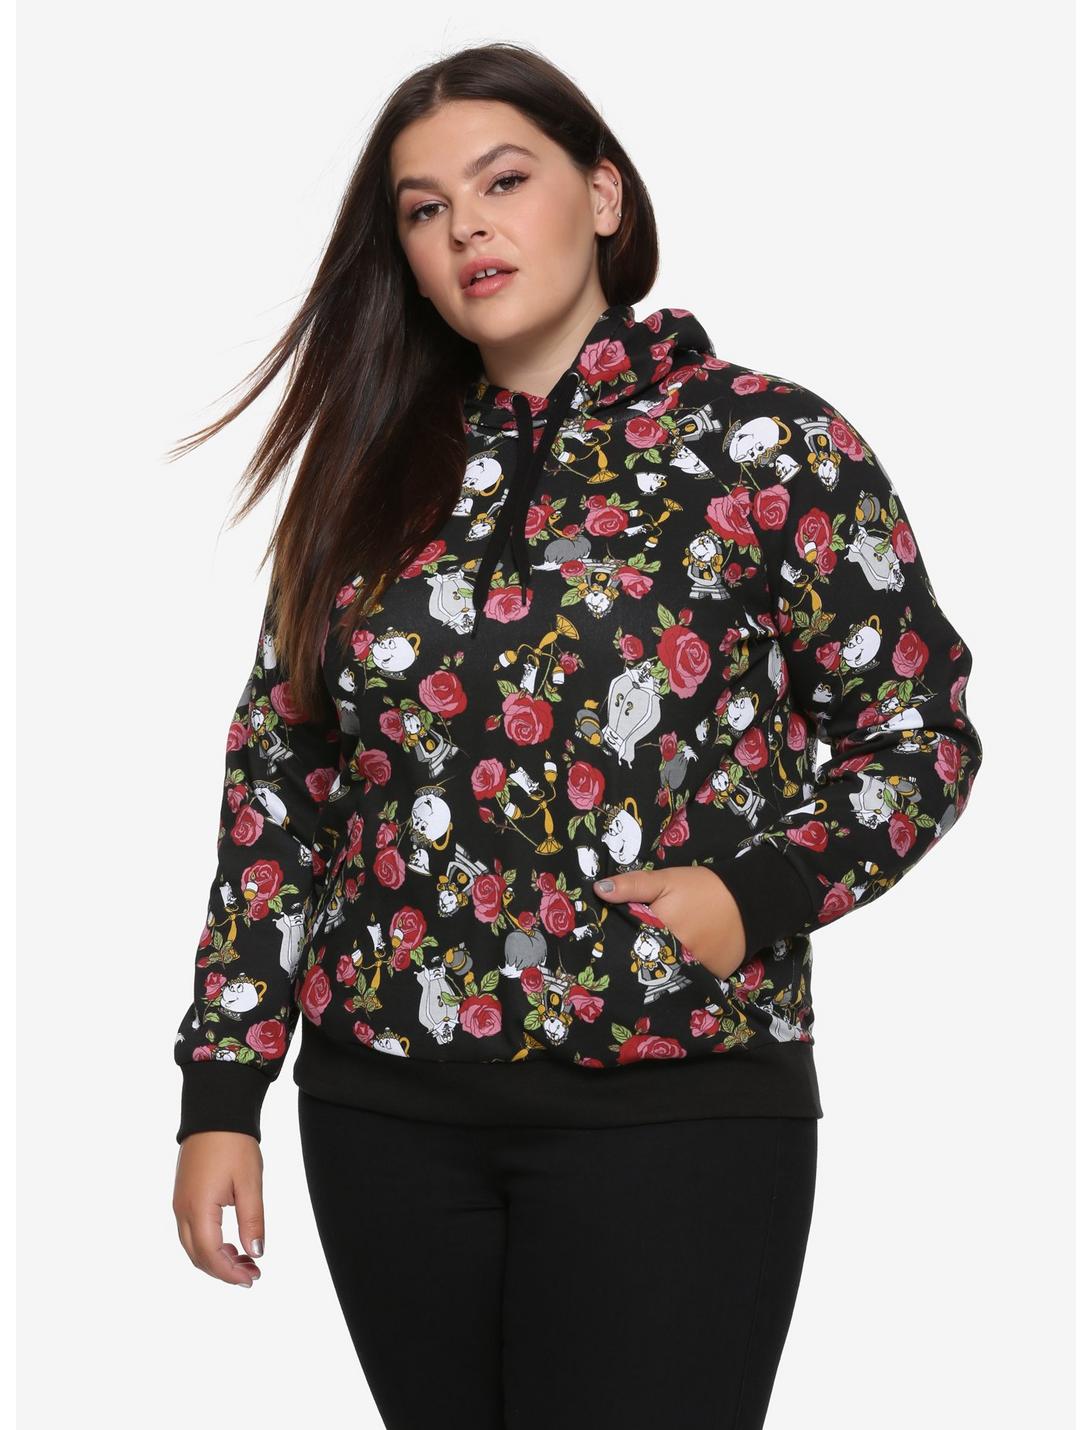 Disney's Beauty And The Beast Floral Objects Girls Hoodie Plus Size, MULTICOLOR, hi-res